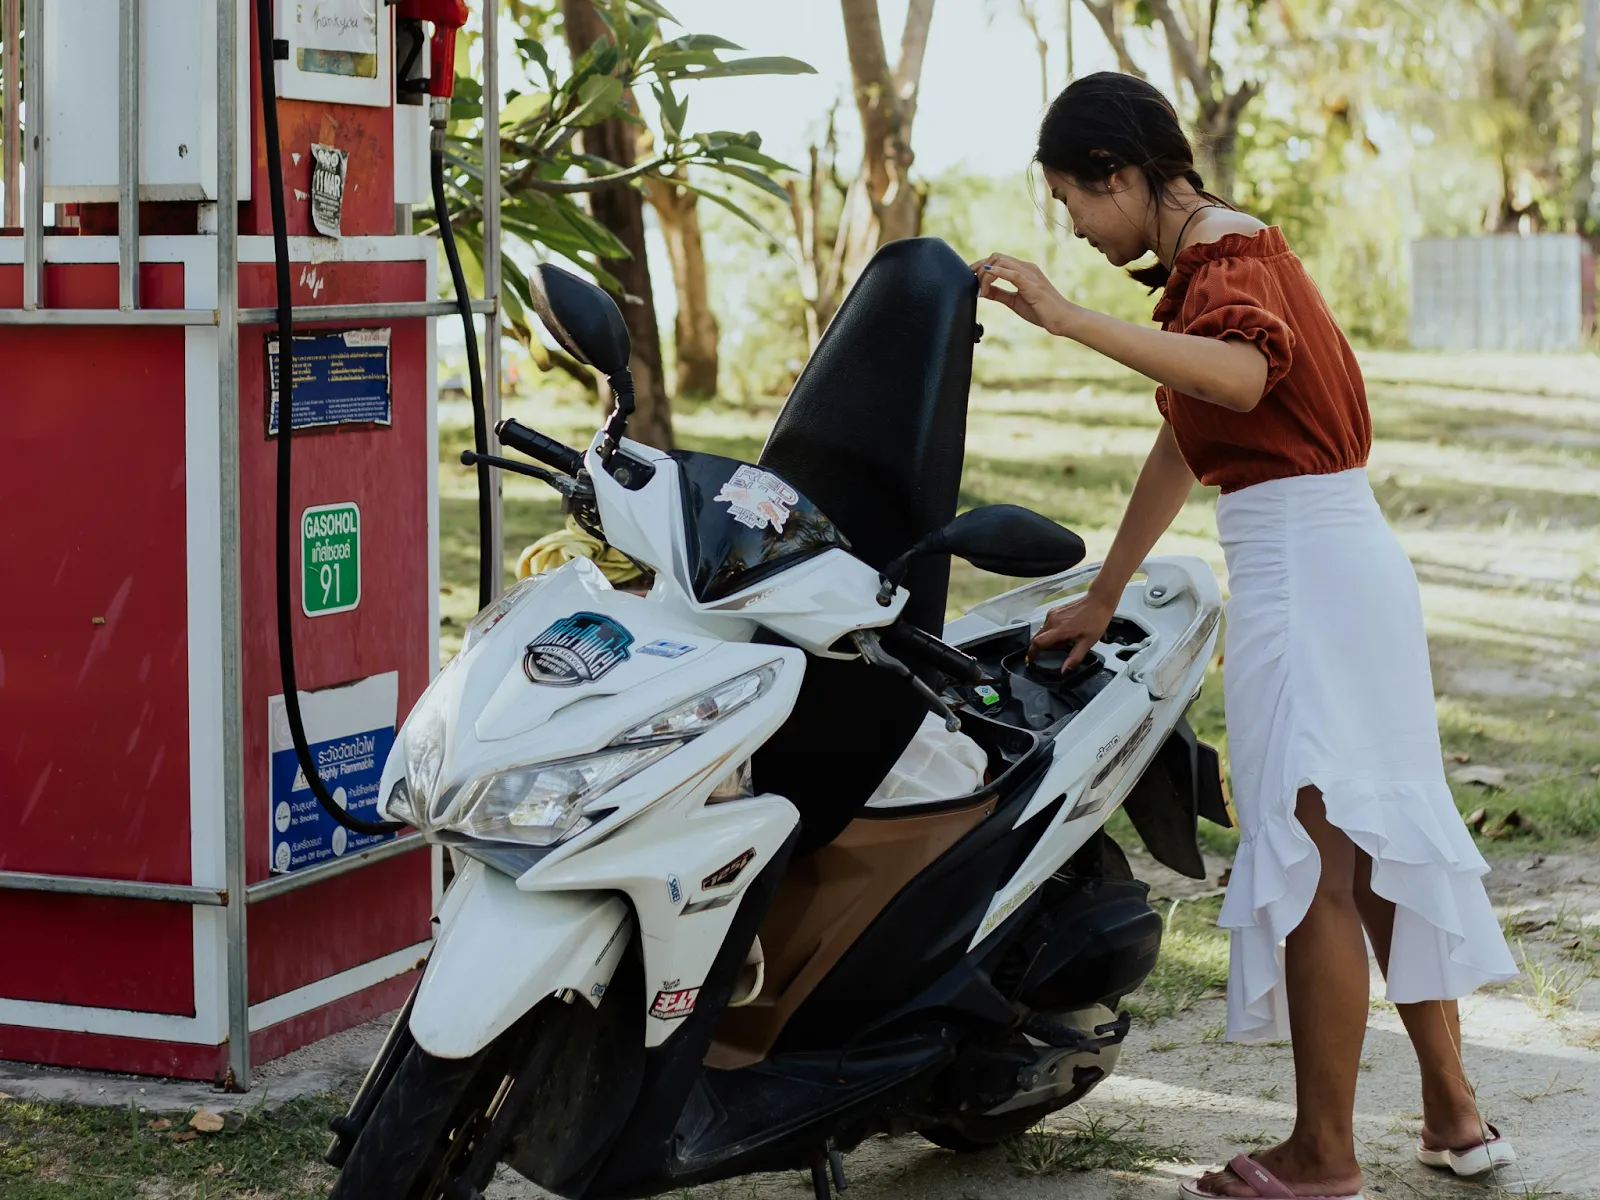 A woman filling up her Honda Click motorbike with gasoline

